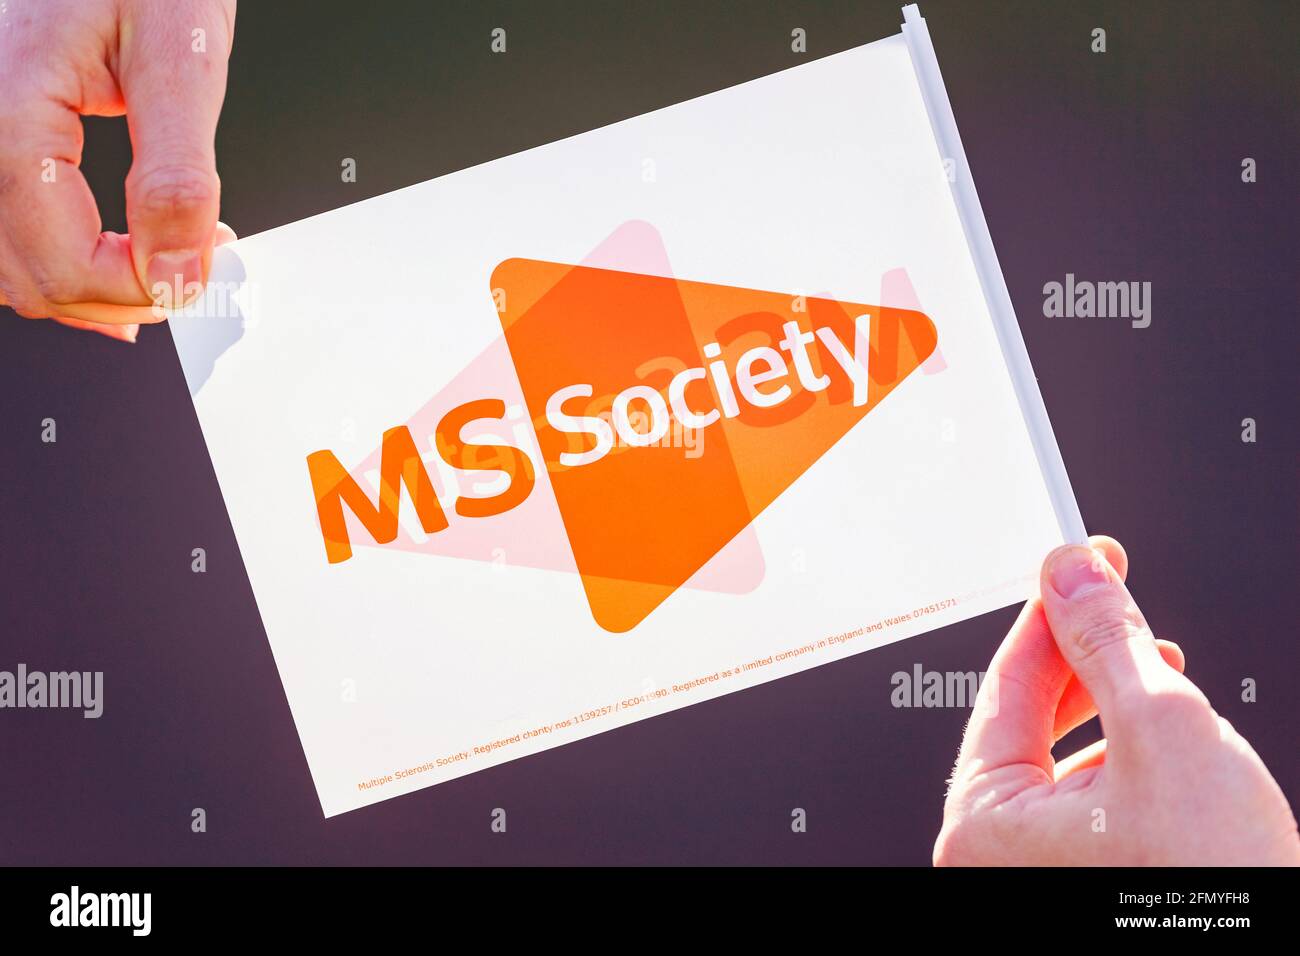 MS Society, Fund Raising Images Foto Stock